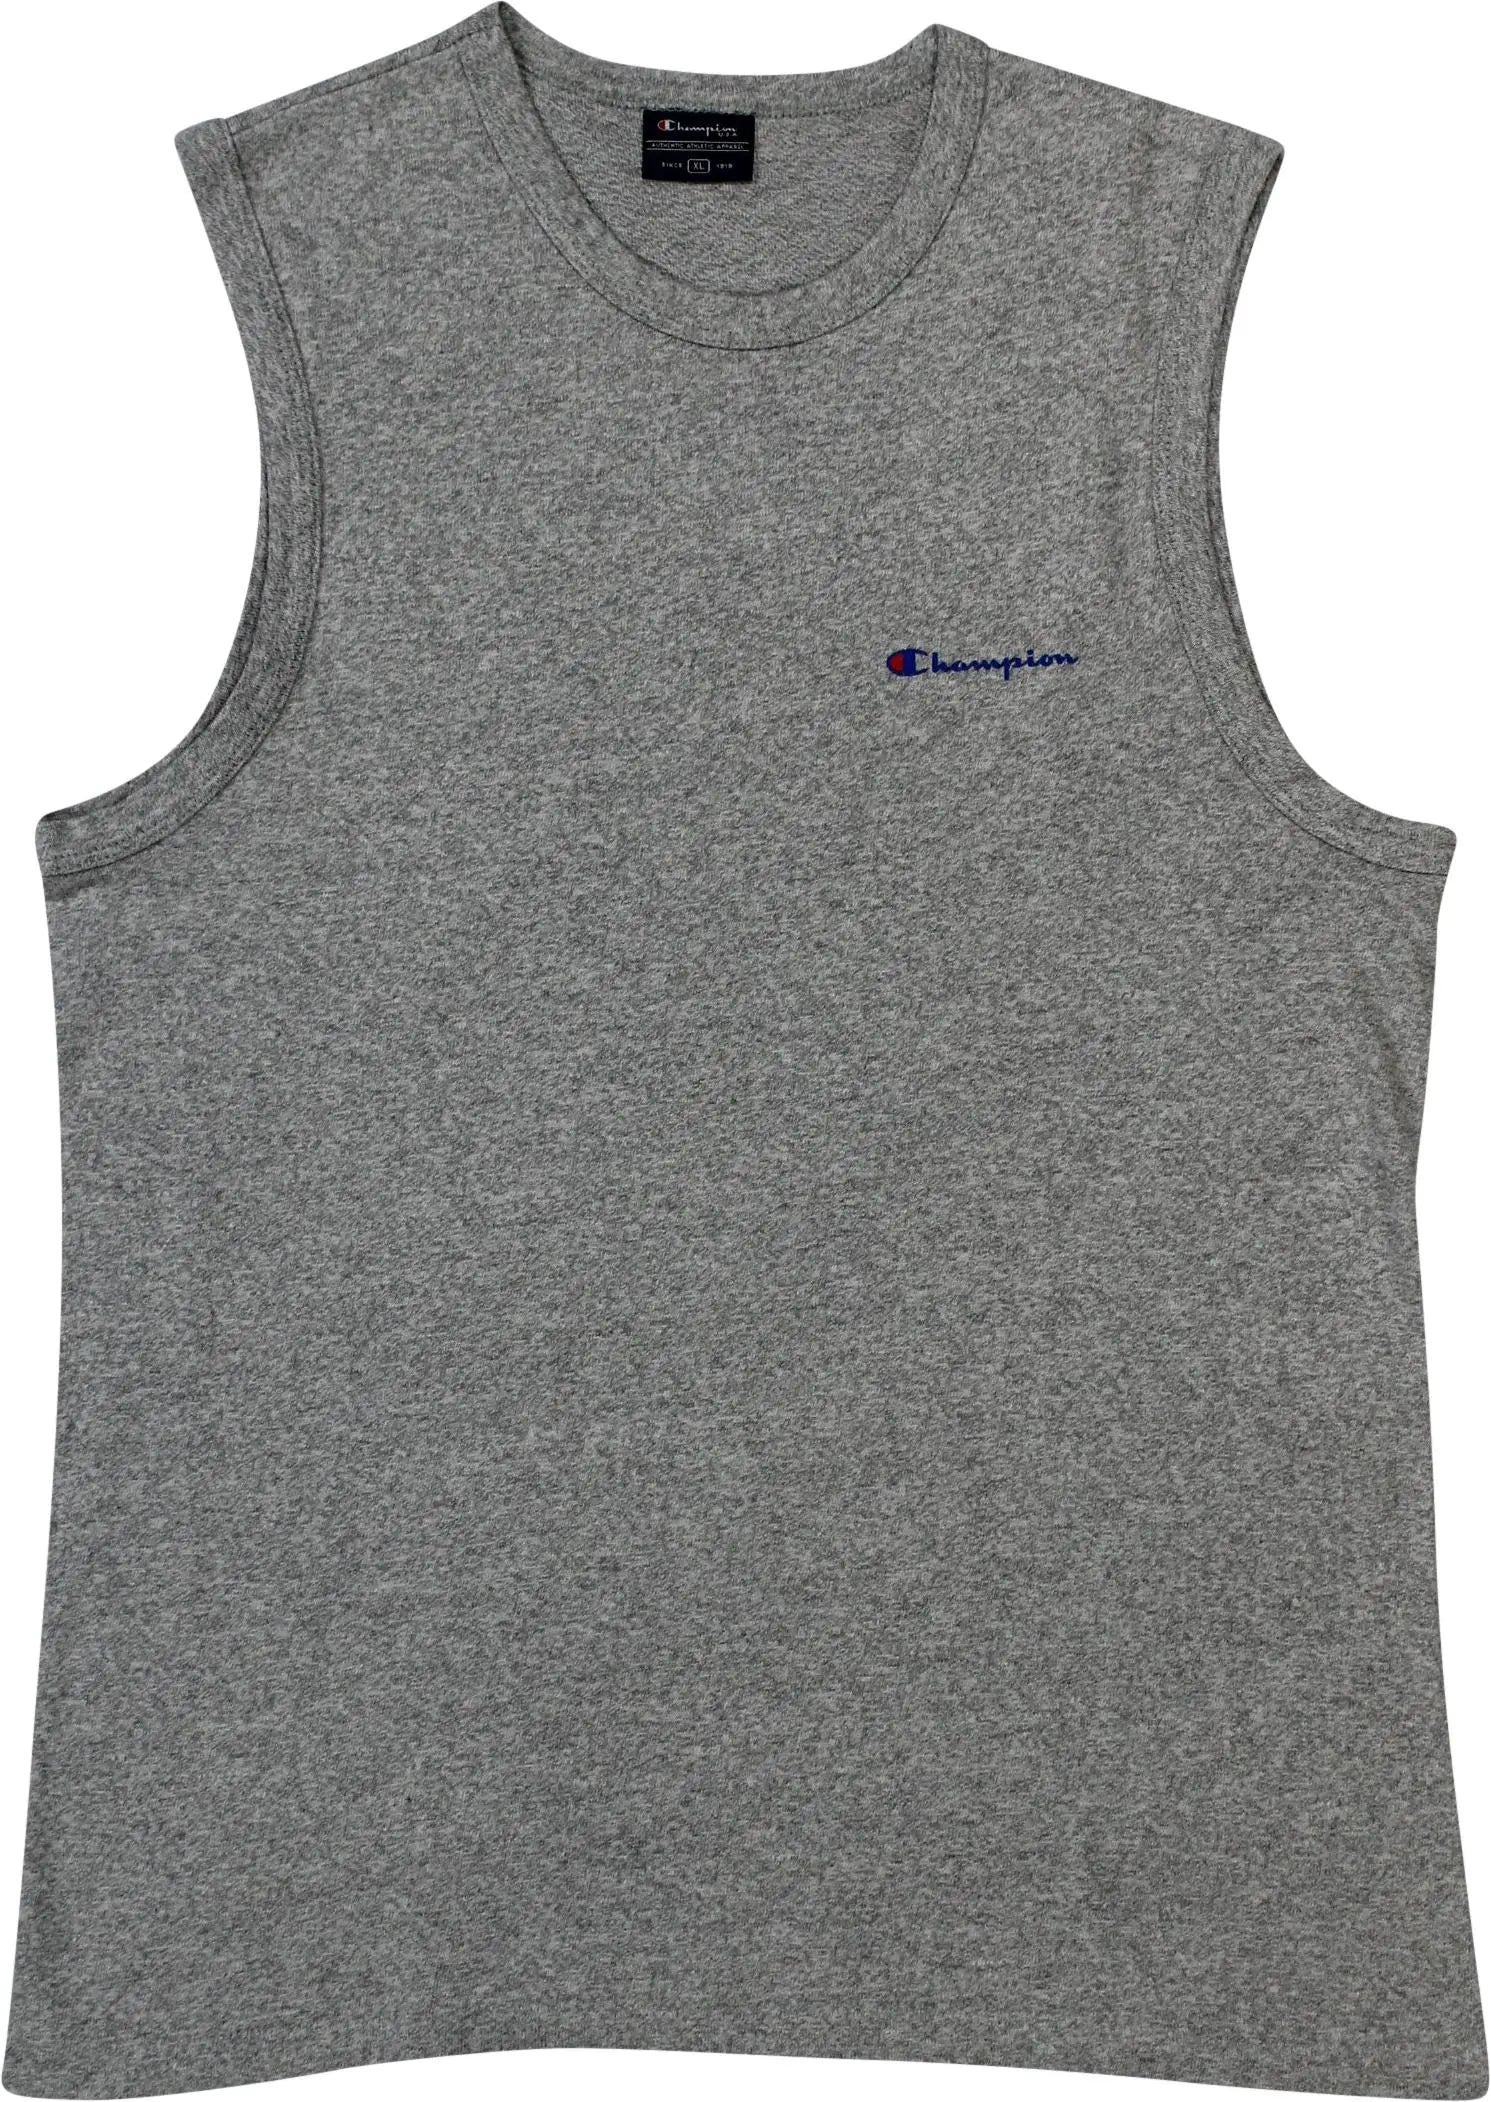 Champion - Grey Sleeveless Top by Champion- ThriftTale.com - Vintage and second handclothing